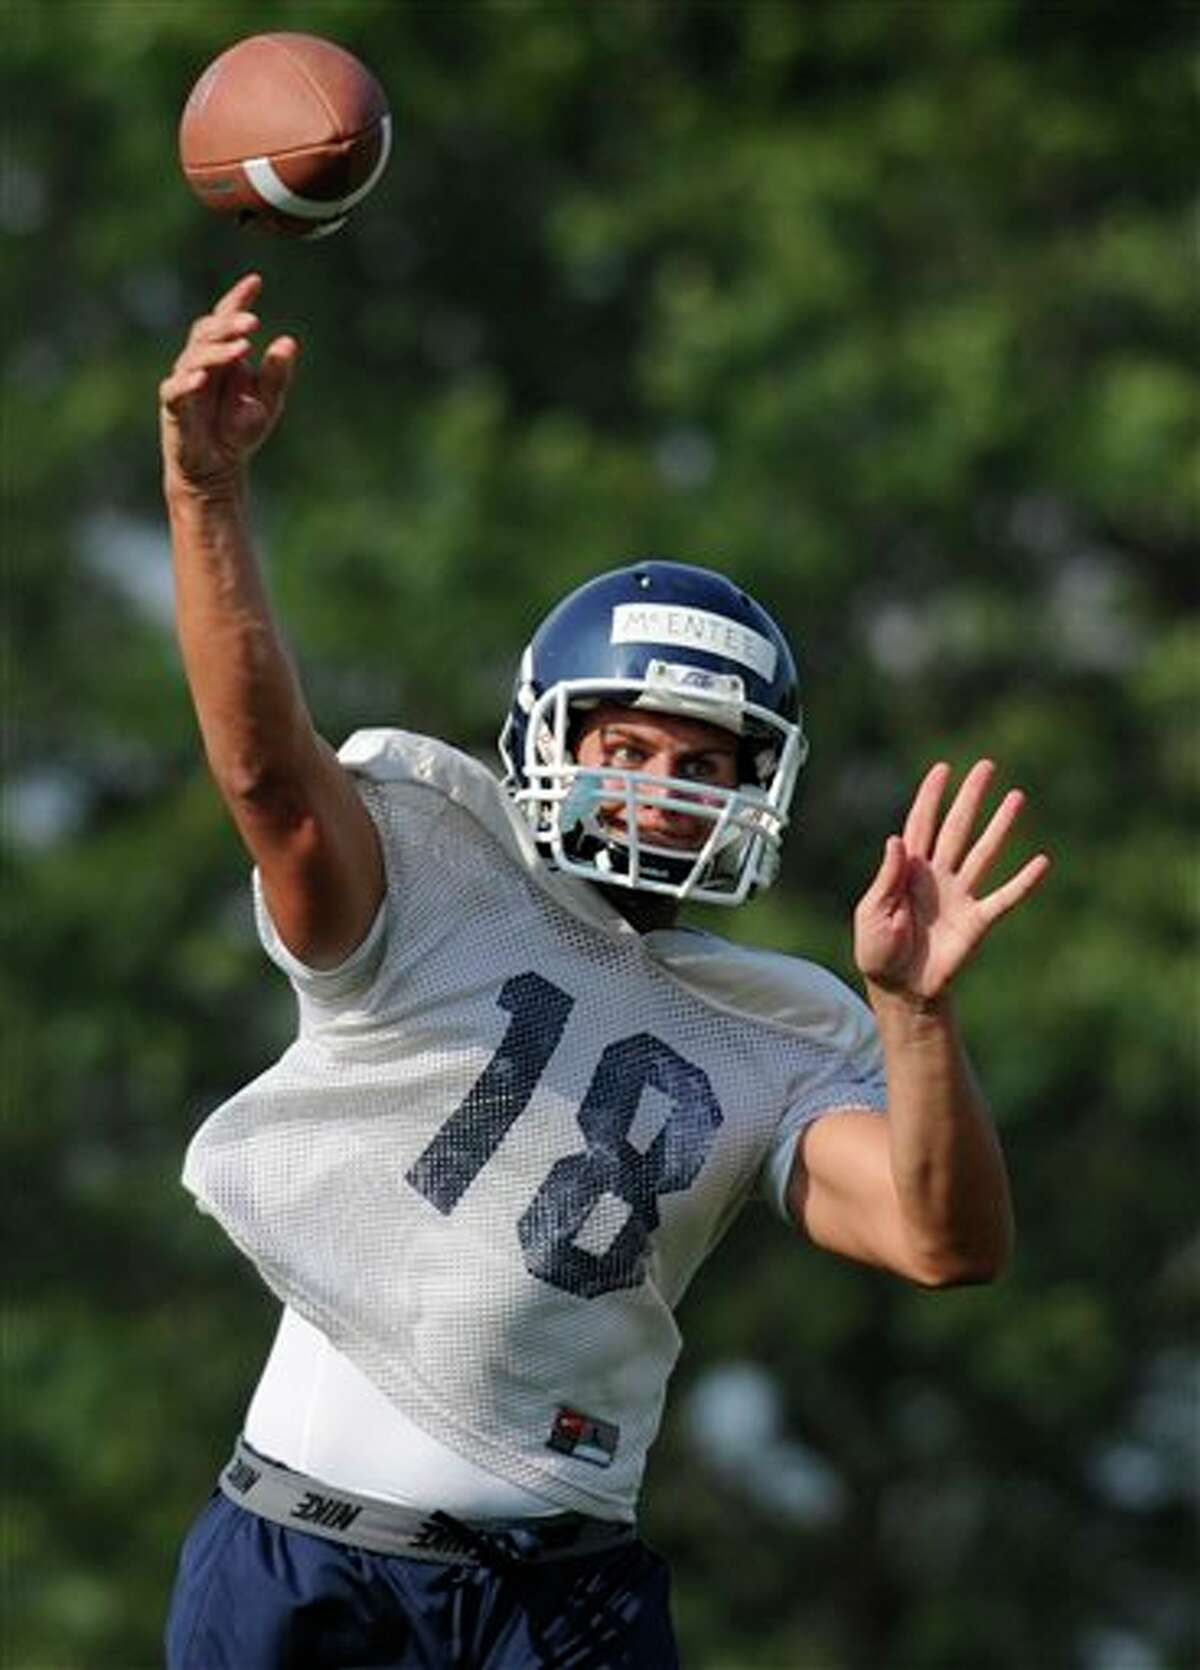 Connecticut quarterback Johnny McEntee throws during the first NCAA college football practice of the season at the University of Connecticut in Storrs, Conn., Friday, Aug. 5, 2011.